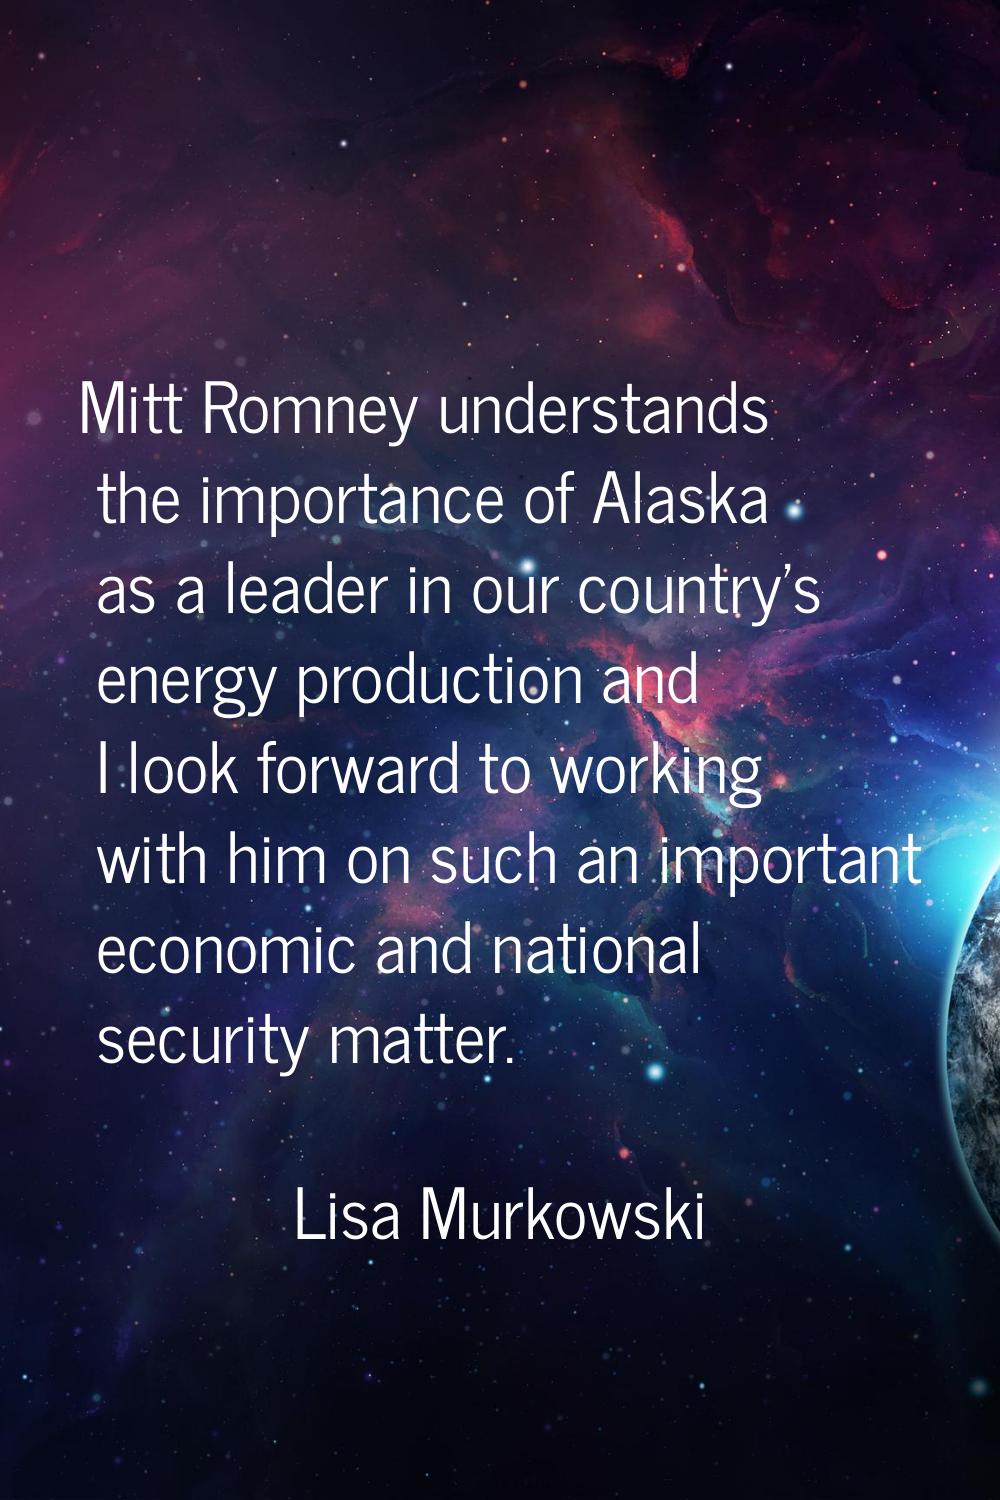 Mitt Romney understands the importance of Alaska as a leader in our country's energy production and